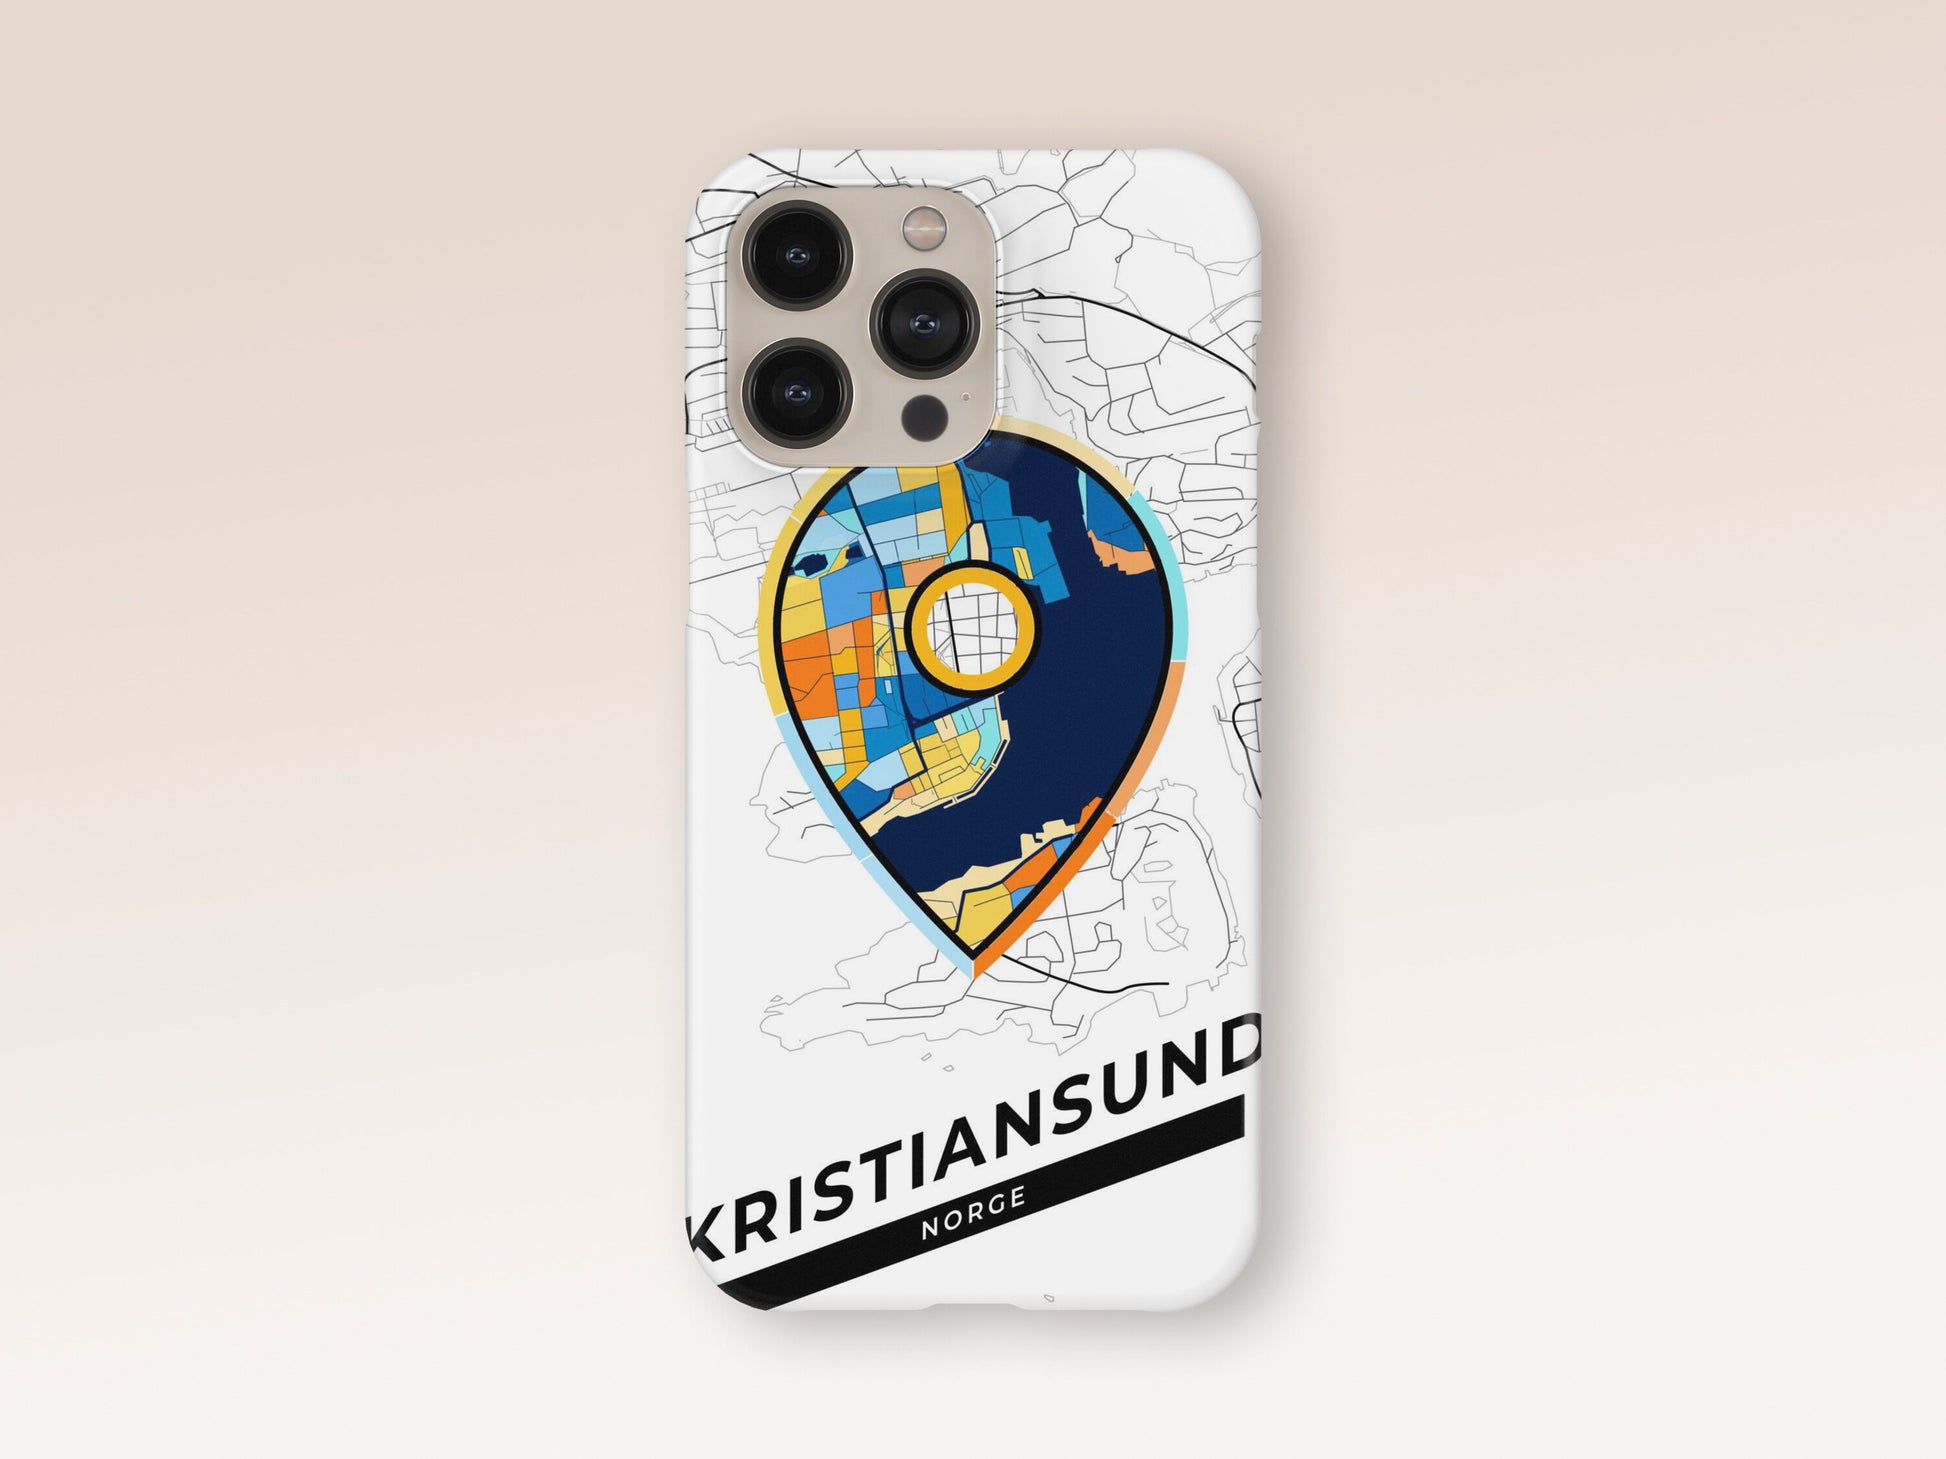 Kristiansund Norway slim phone case with colorful icon. Birthday, wedding or housewarming gift. Couple match cases. 1